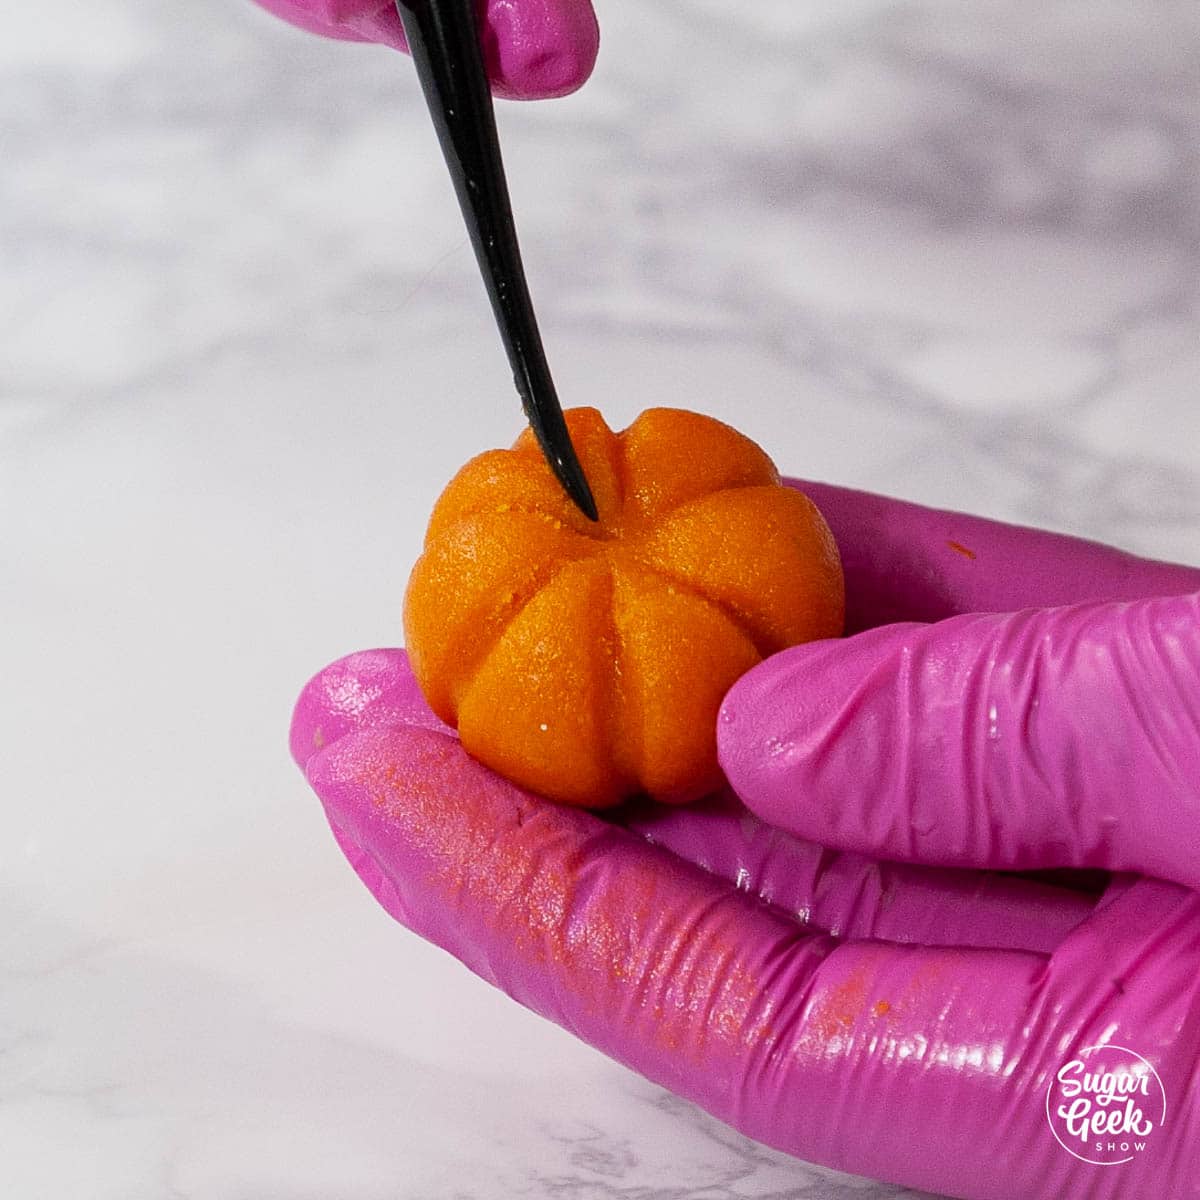 marzipan candy pumpkin held by pink gloved hand and black modeling tool above